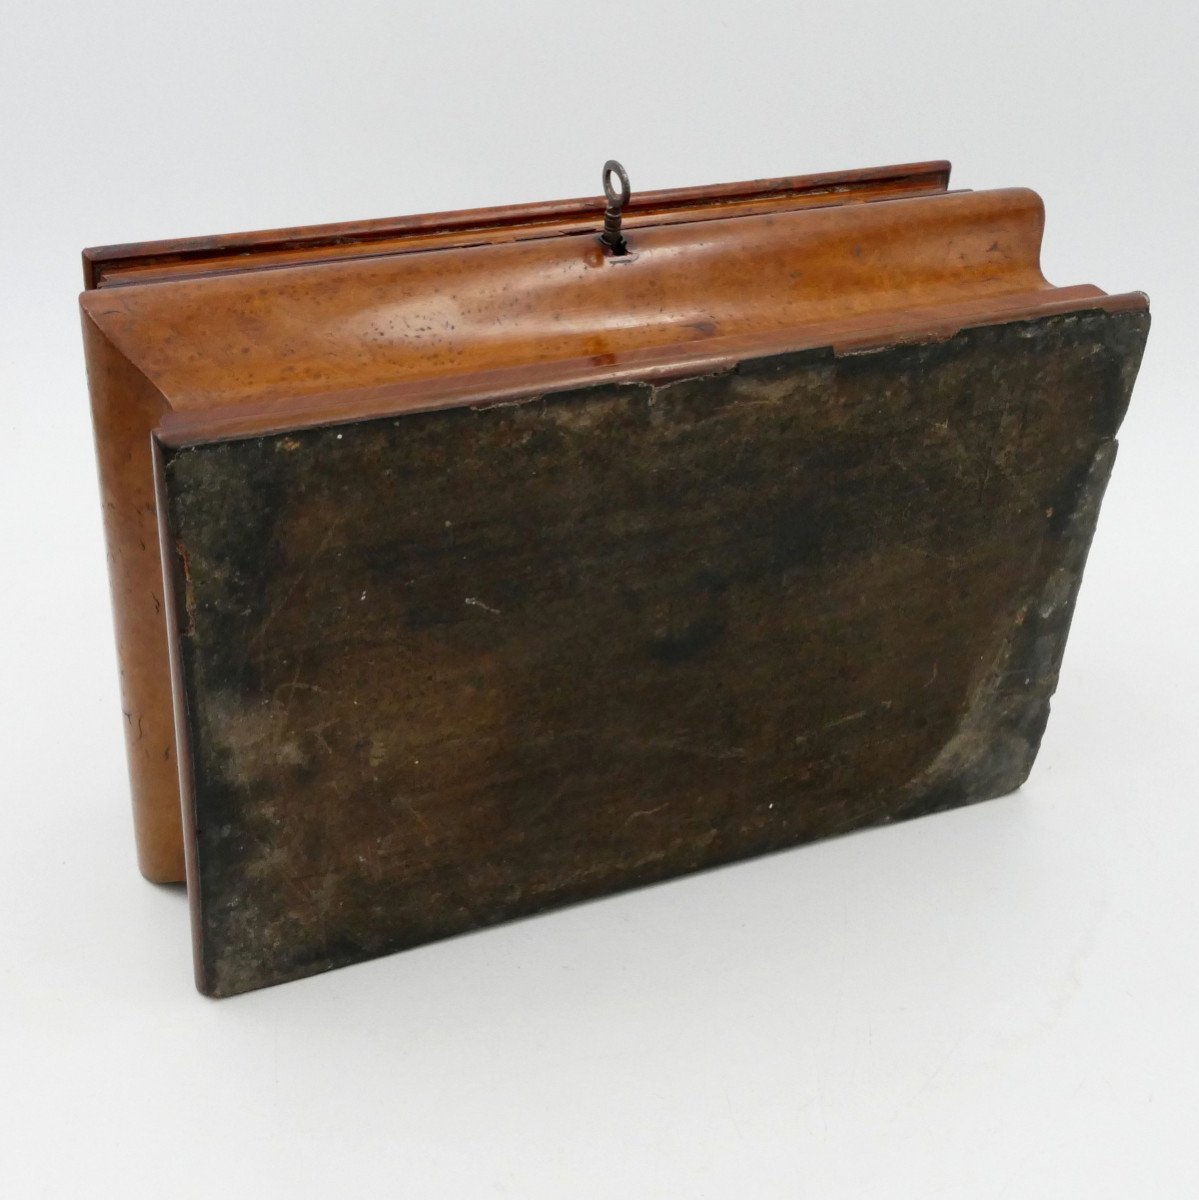 Box, Sewing Or Jewelry Box, Secret Compartments, 19th Century, Regency Style.-photo-6